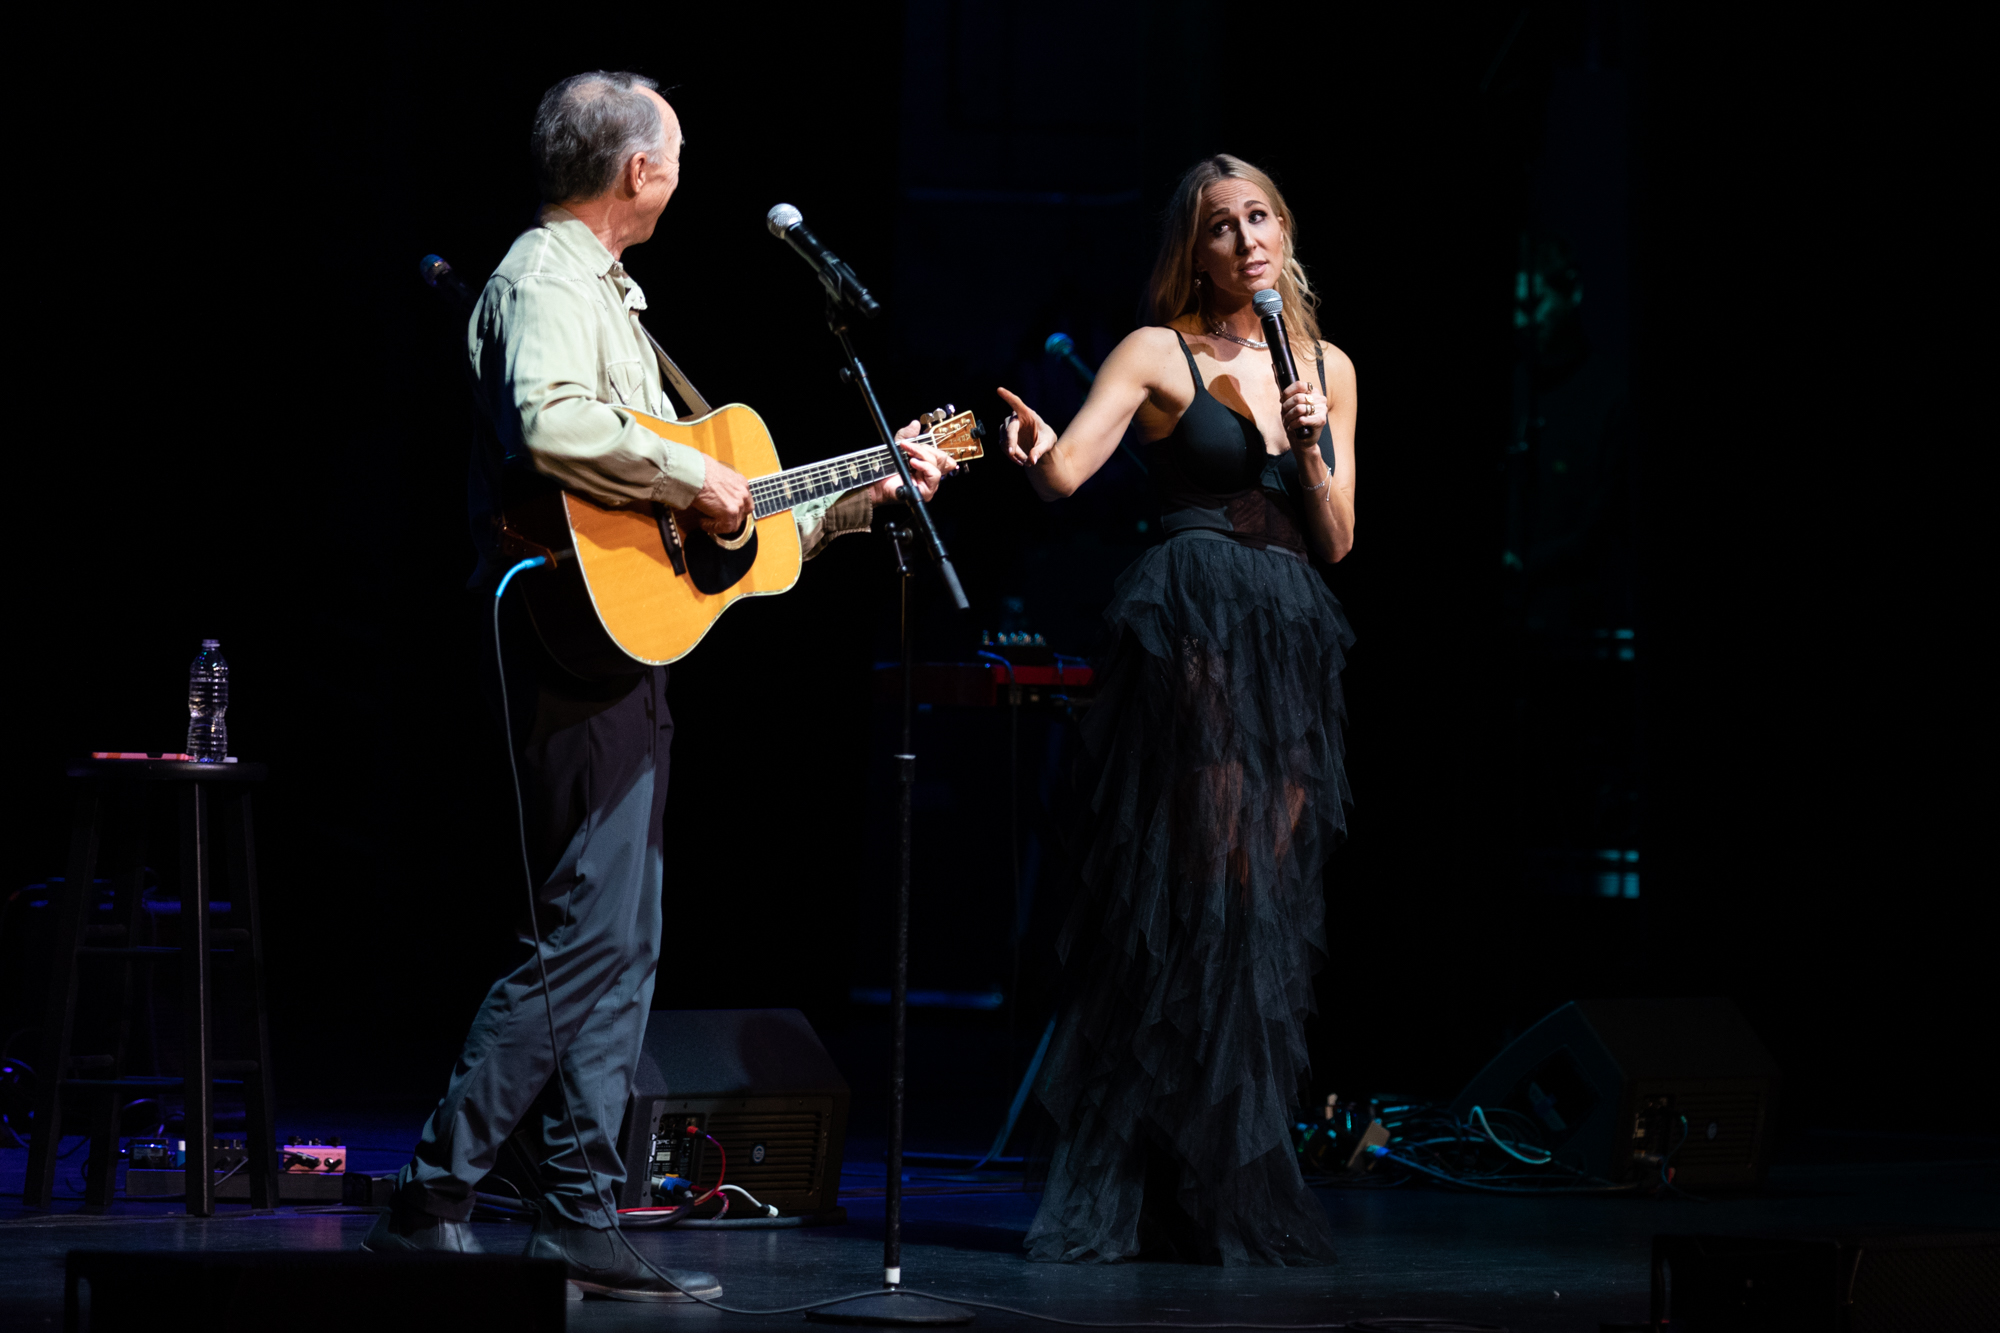 A woman (Nikki Glaser) and a man (Nikki Glaser's dad) standing on a dimly lit black stage. The woman is wearing a long, sheer black dress and speaking into a microphone while pointing at the man to her left. The man is playing a light brown acoustic guitar and looking at the woman. 